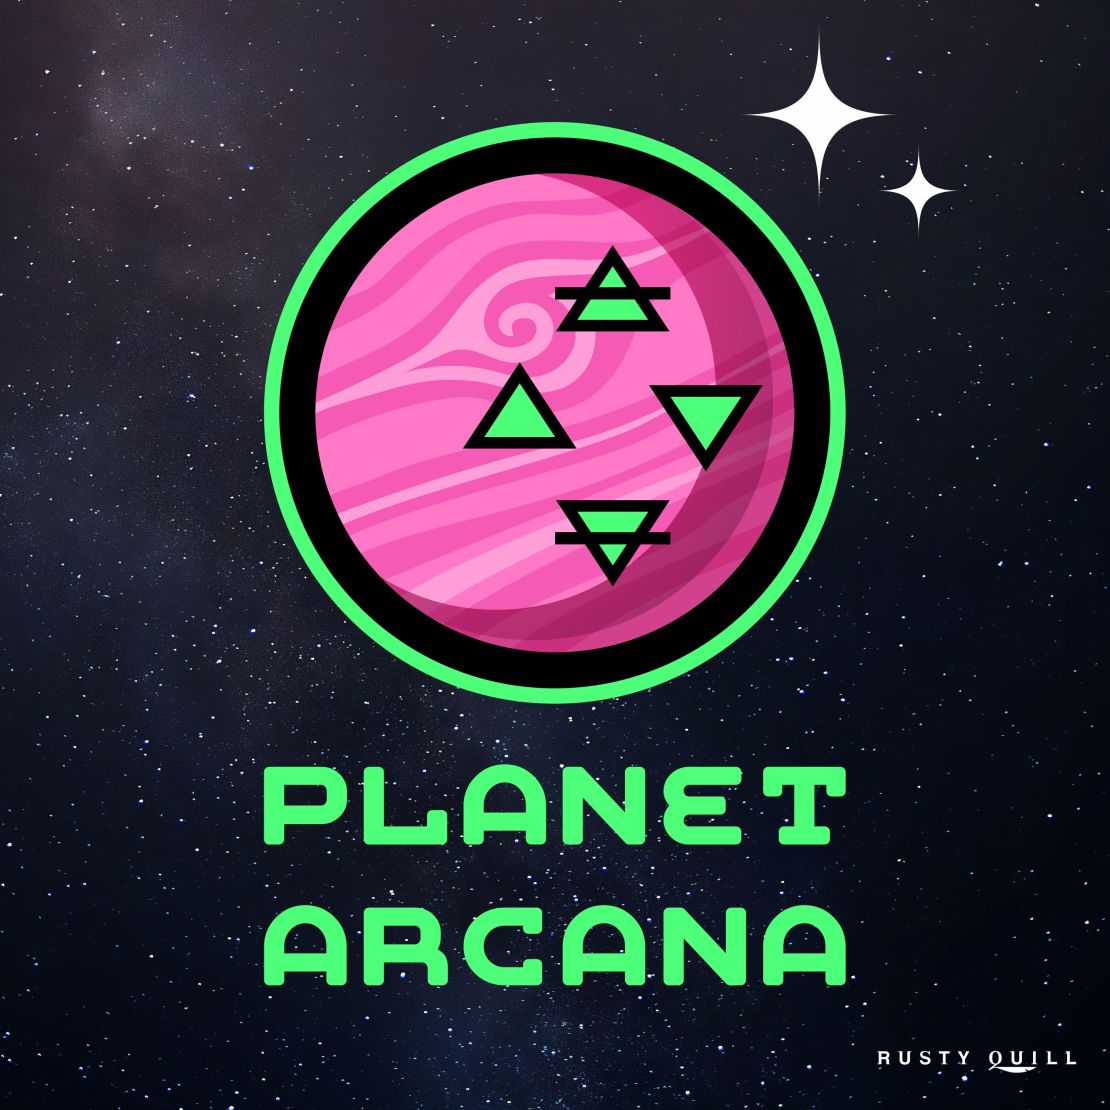 Show cover art, back ground is a field of stars and space, there are 2 bright starts top right of the image, and in the center is a pink planet surrounded by a black and then a green circle. There are 4 green triangles on the surface of the planet laid out like a compass. Below the planet is in green writing is "PLANET ARCANA".